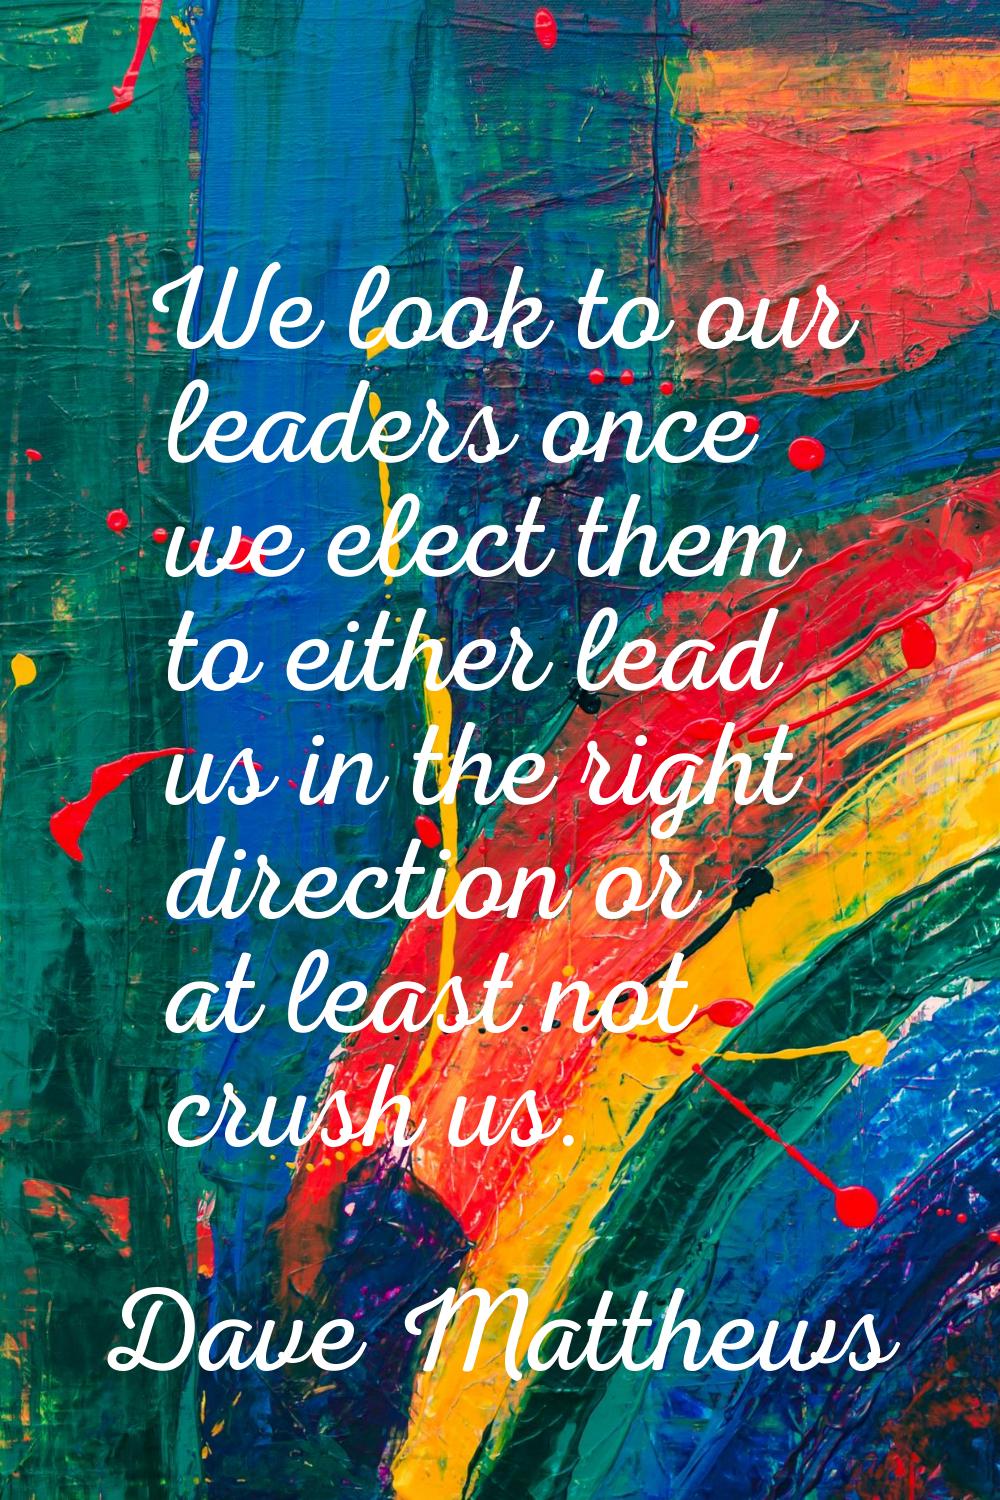 We look to our leaders once we elect them to either lead us in the right direction or at least not 